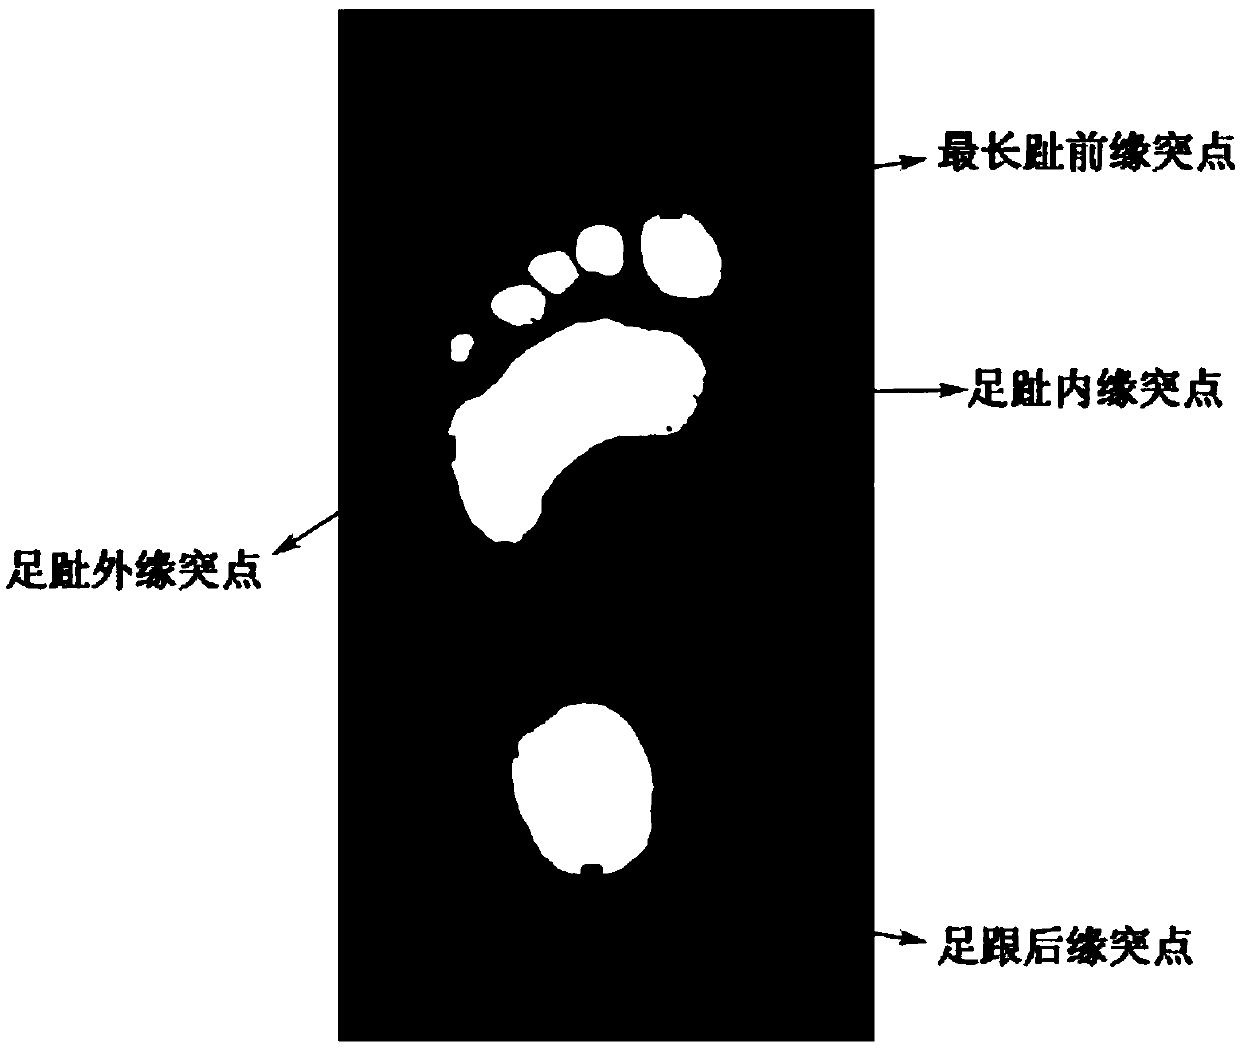 Method and a system for identifying the same person based on barefoot footprints